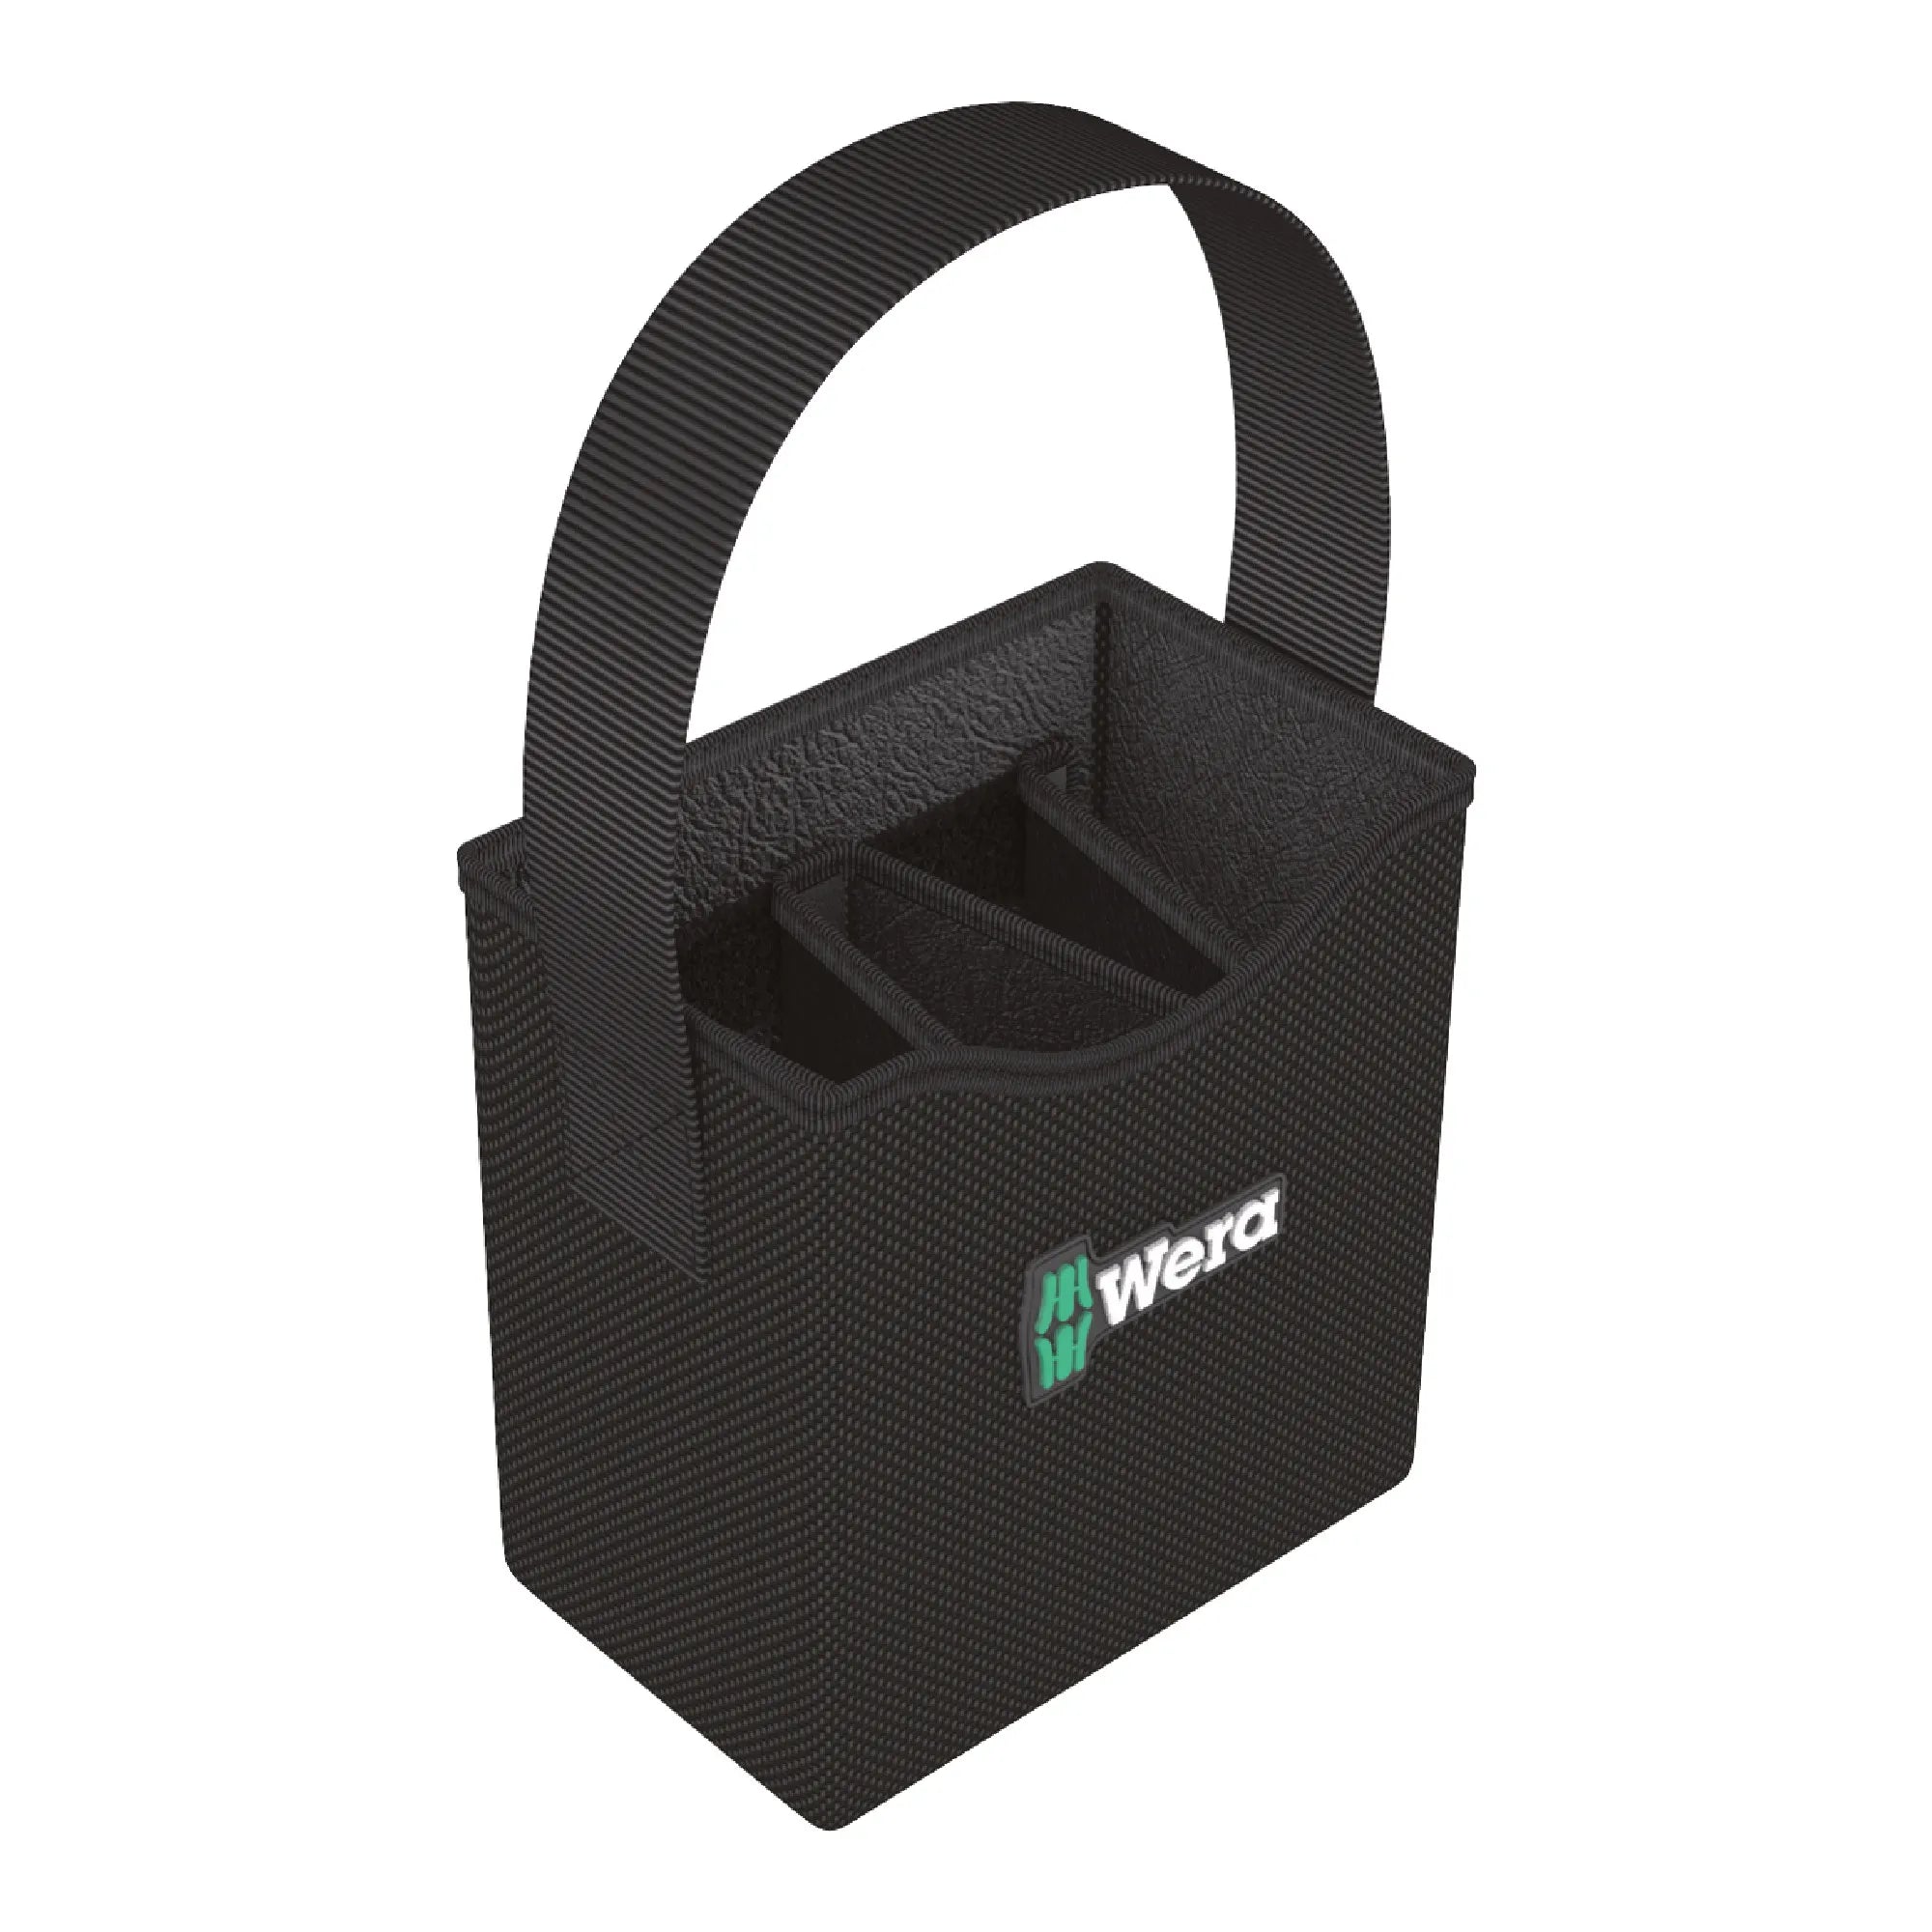 Wera 2go 4 stable and robust Tool Quiver (05004353001)